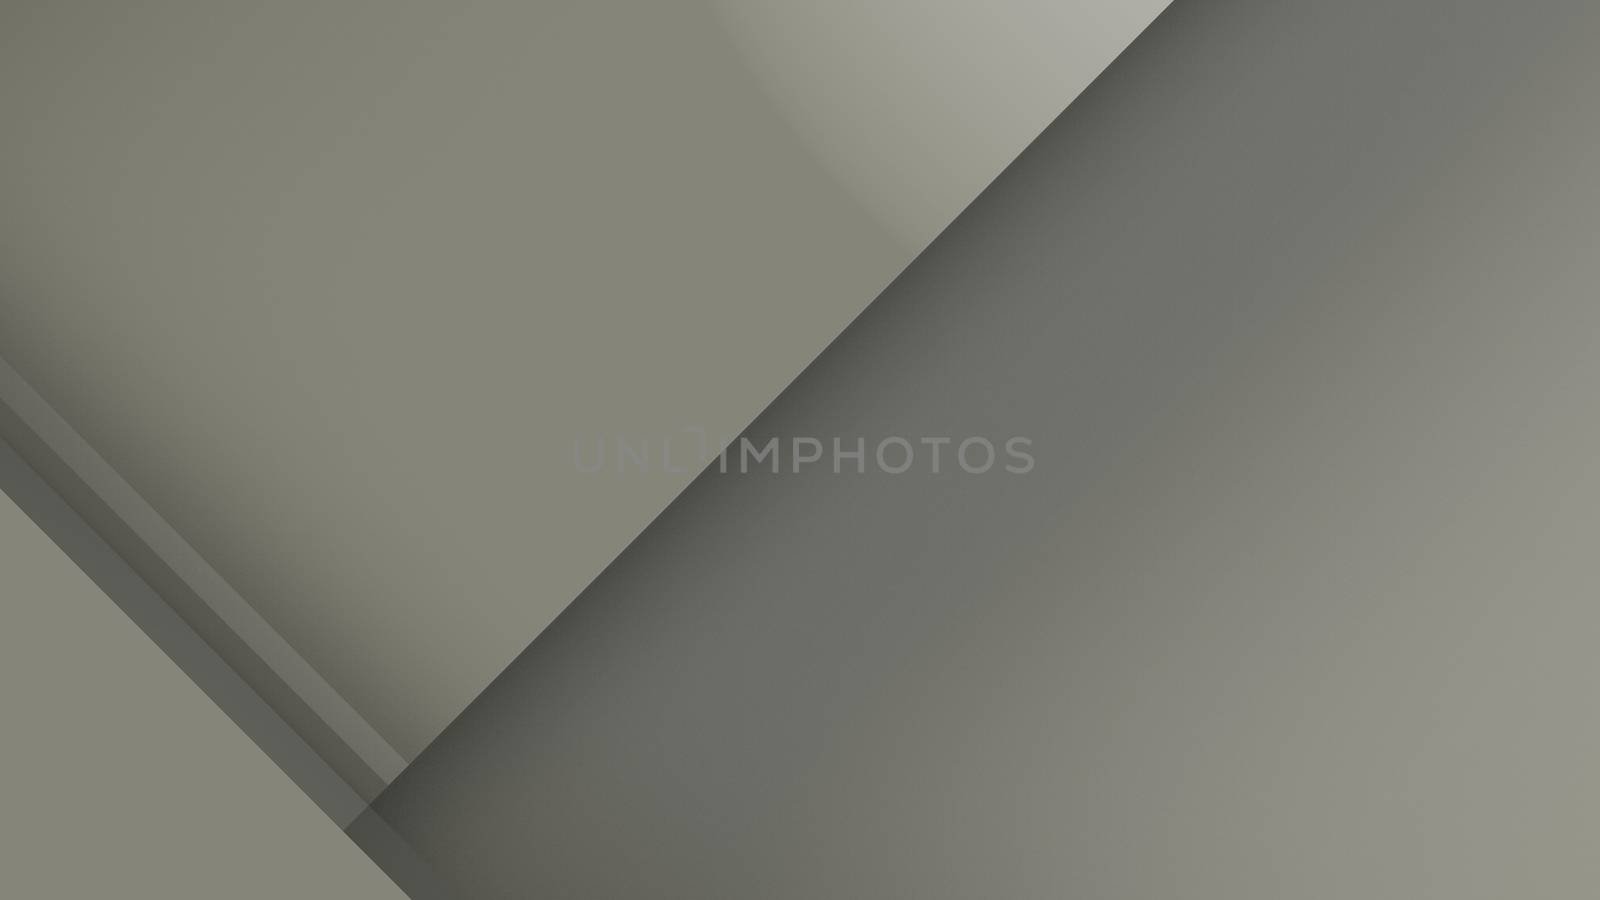 Diagonal gray dynamic stripes on white background. Modern abstract background with lines and dark shadows